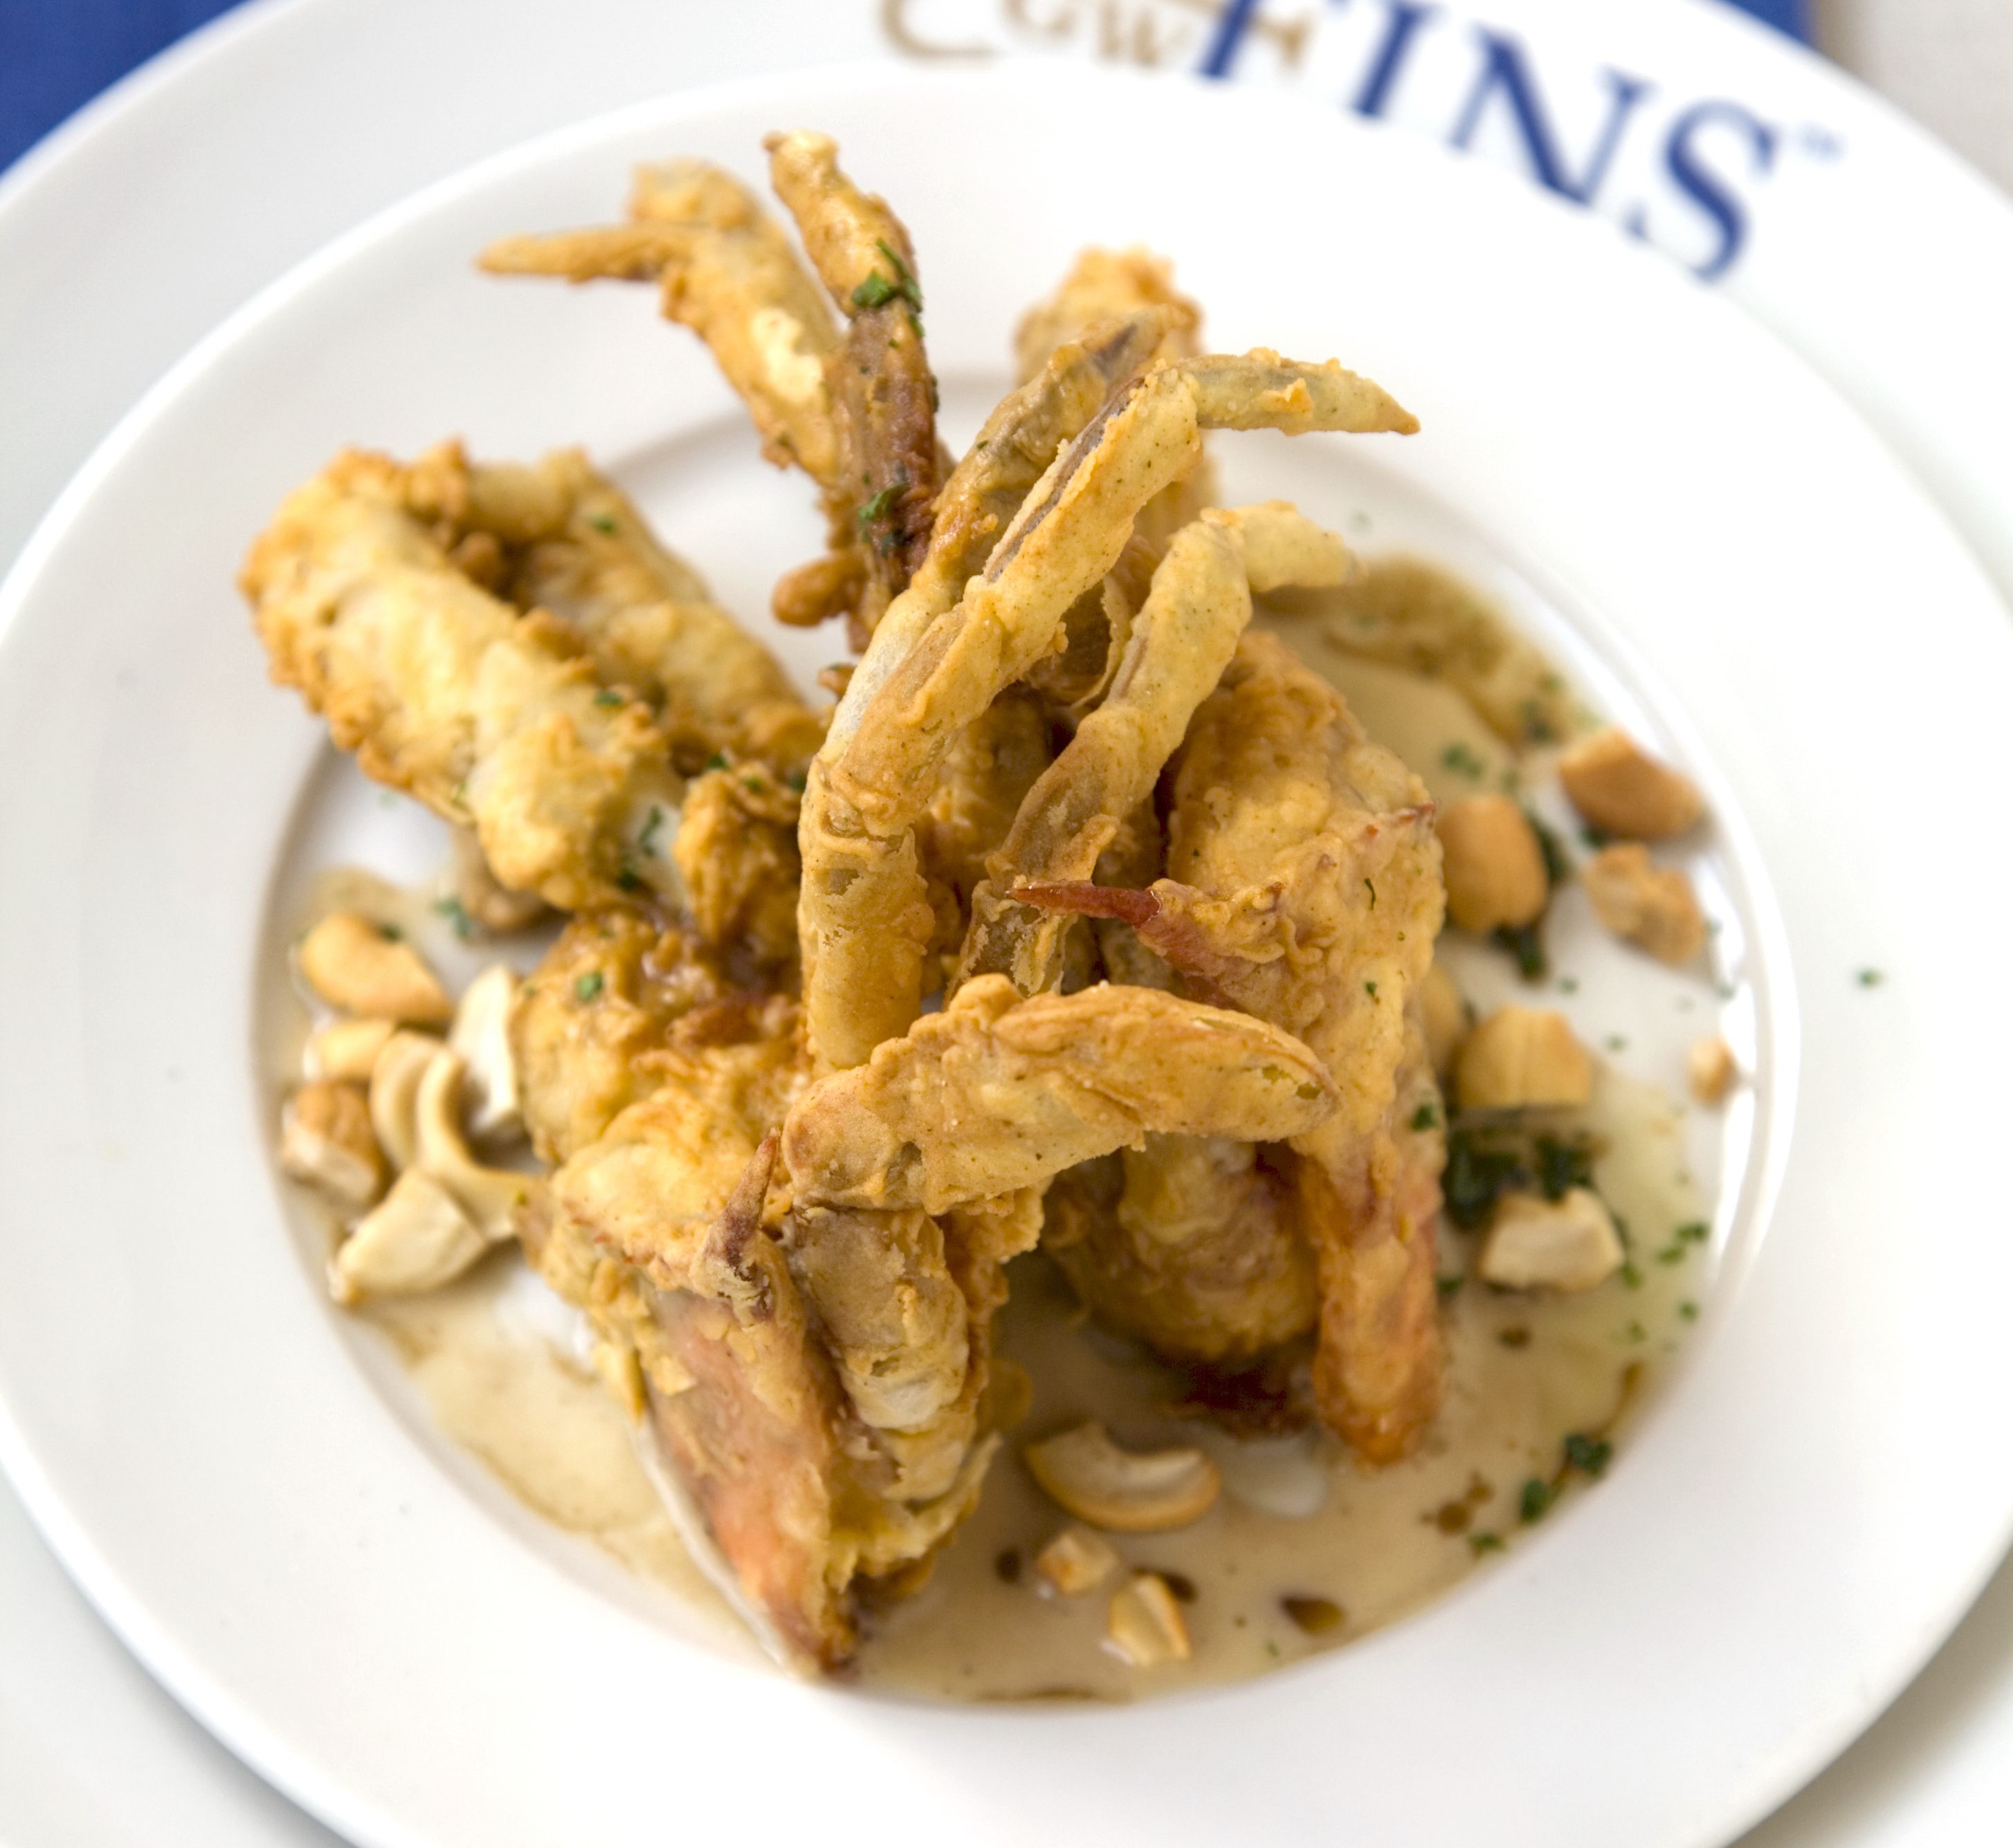 Photo shows a deep-fried soft shell crab on a white plate with sauce under it.